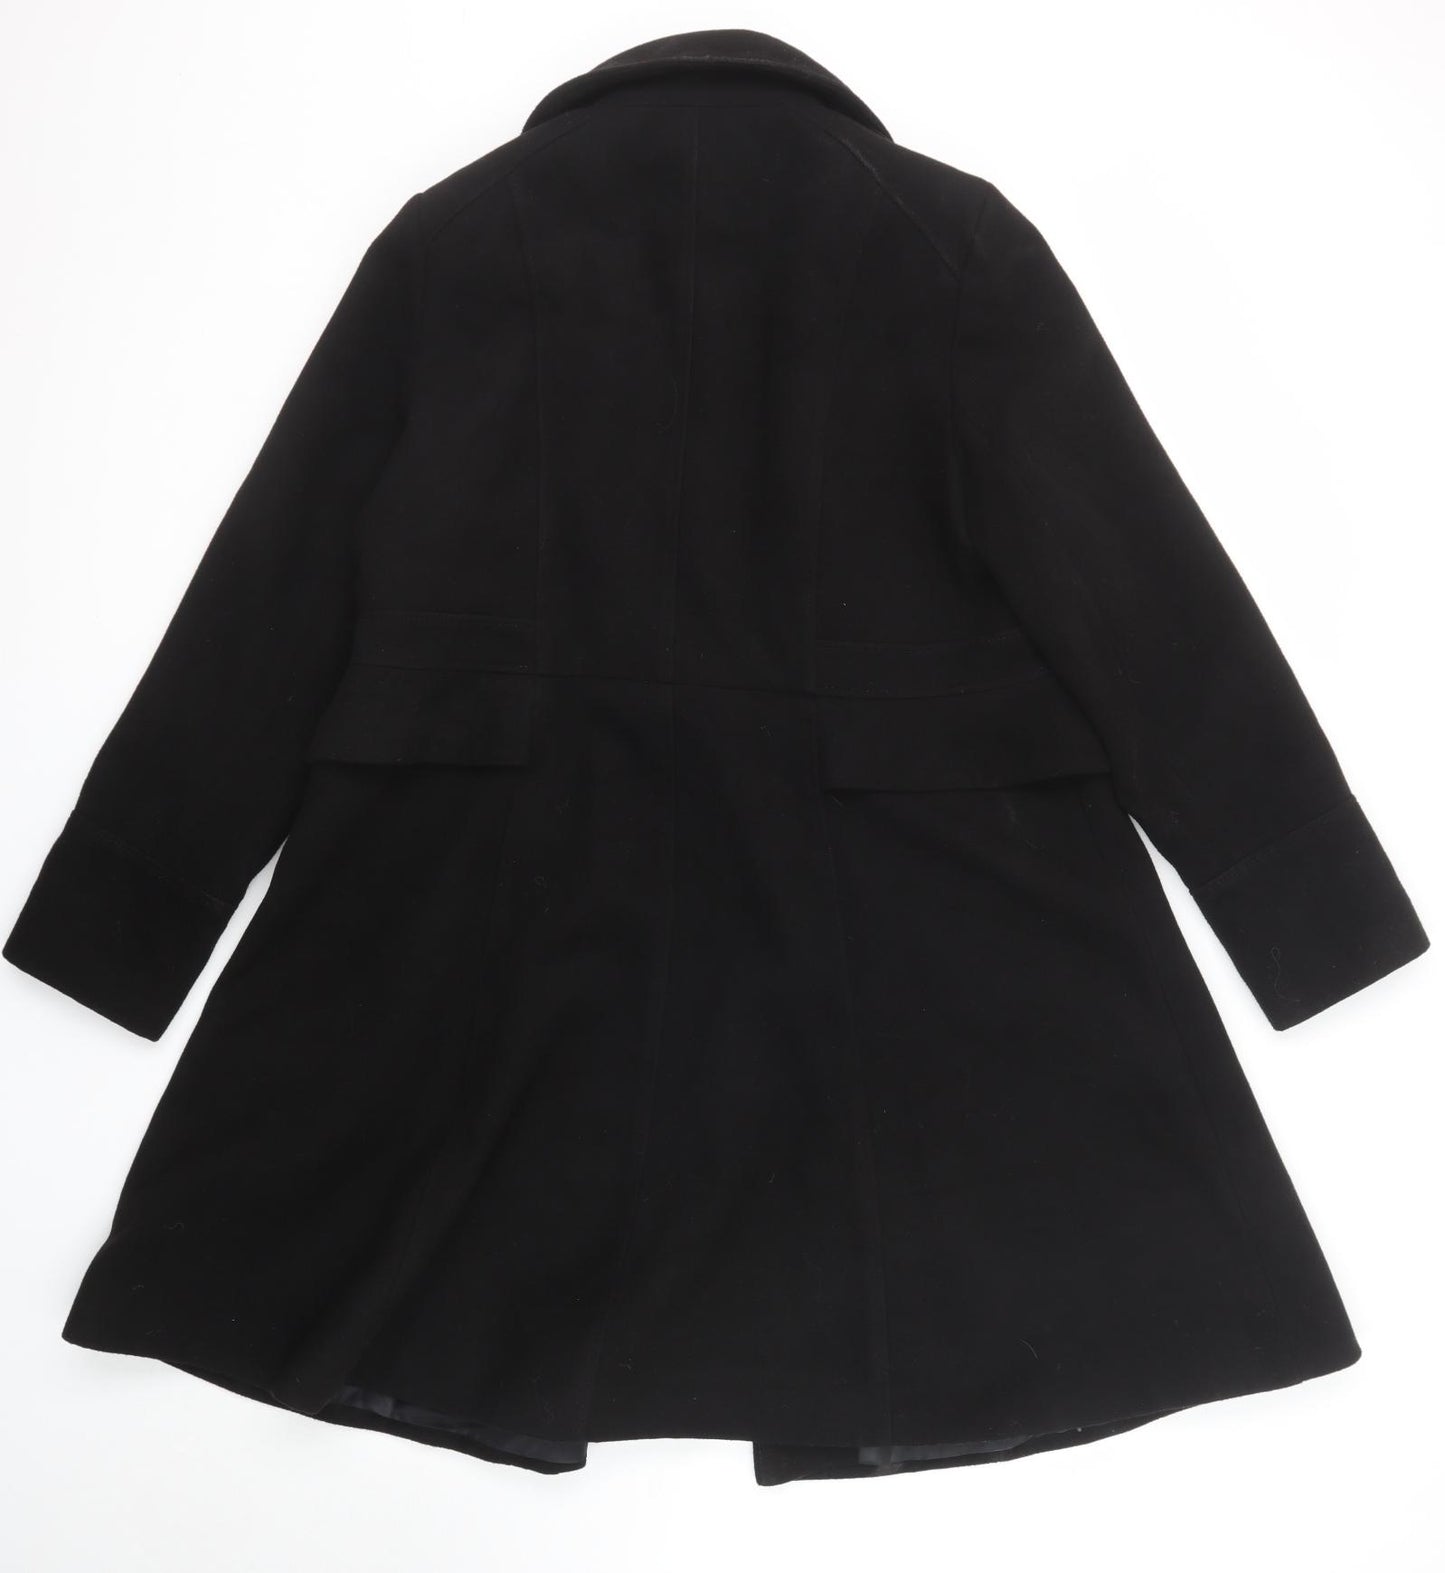 South Womens Black Overcoat Coat Size 20 Button